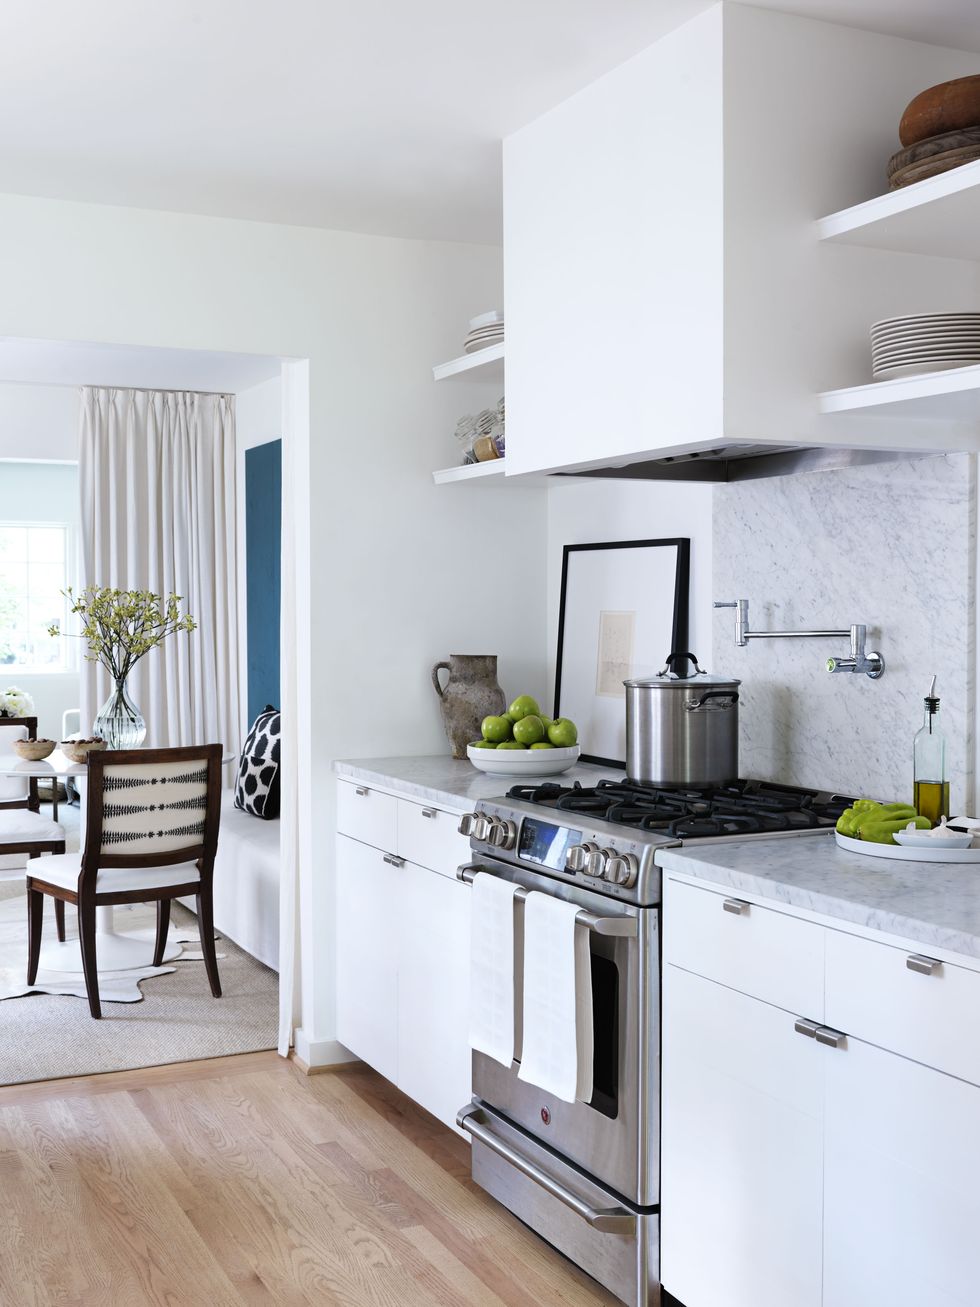 30 Gray And White Kitchen Ideas We Love